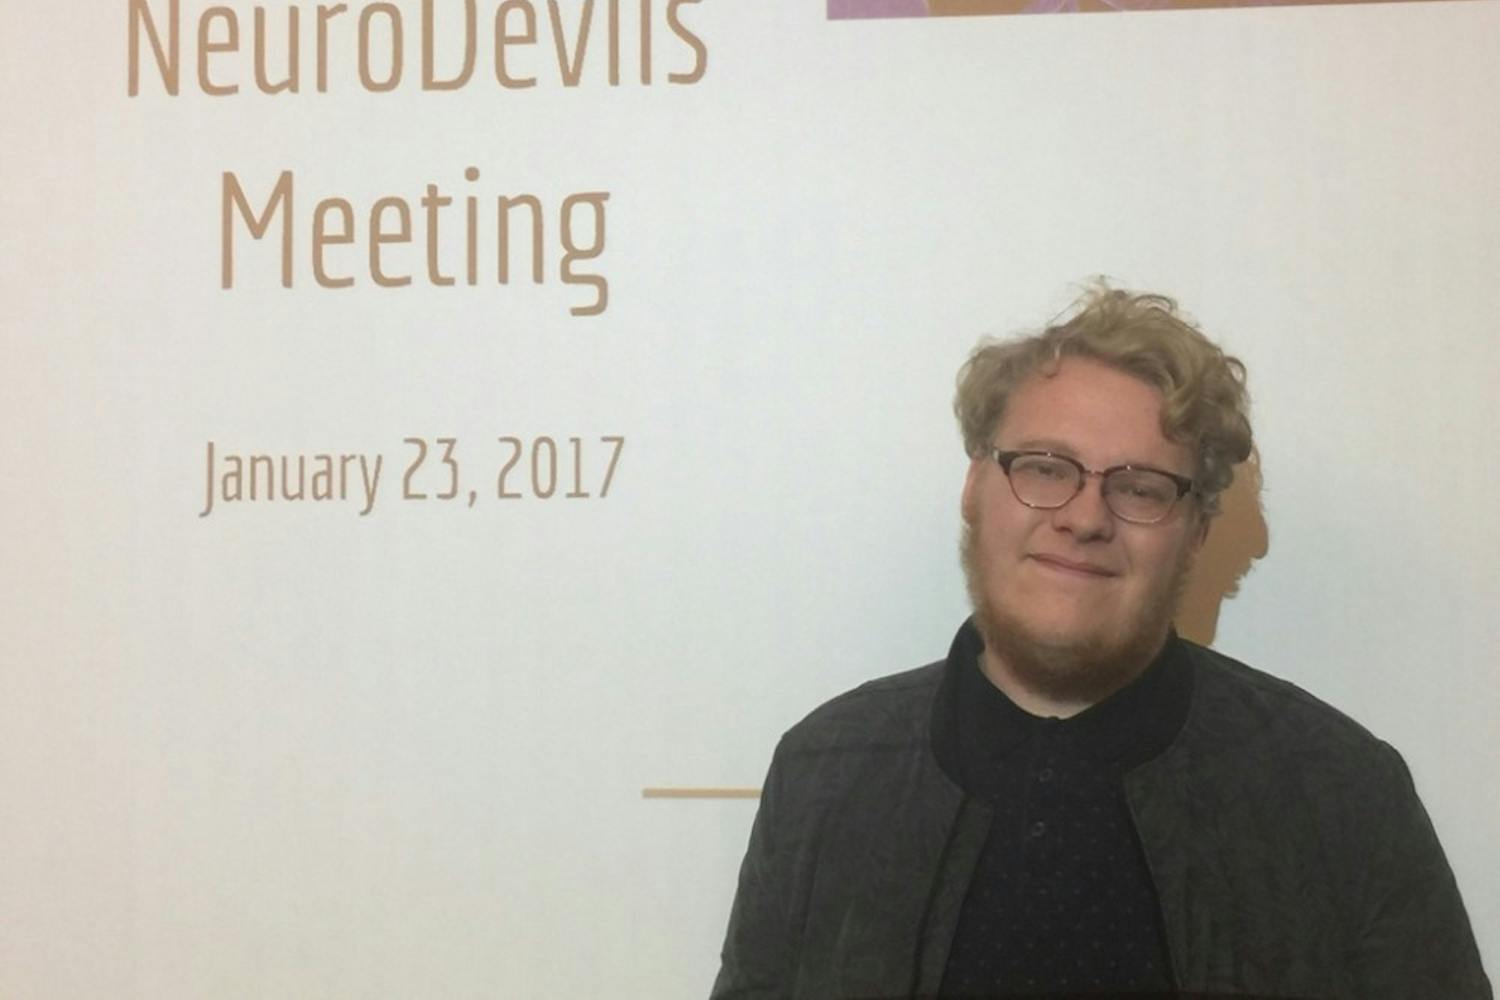 President of NeuroDevils&nbsp;Adam Thompson poses for a photo&nbsp;at its first meeting on Jan. 23, 2017.